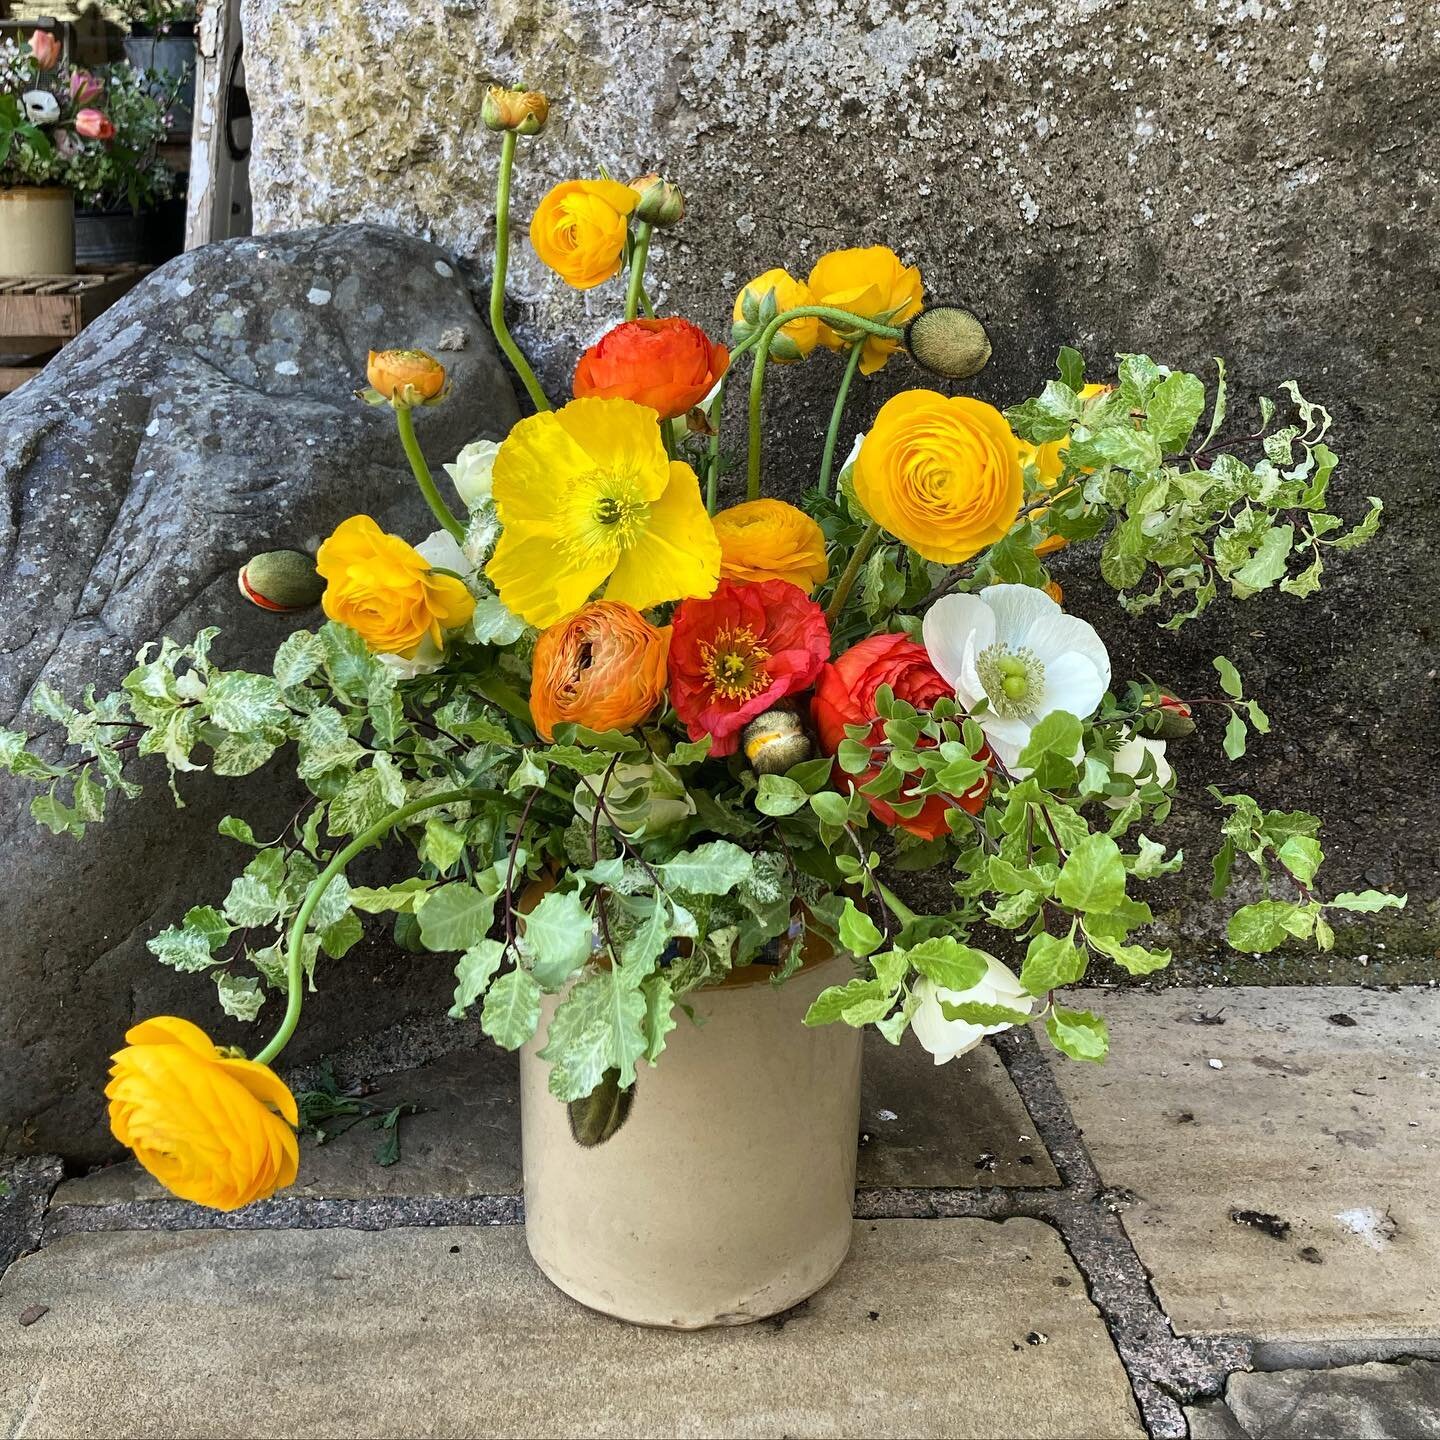 Happy Monday lovely people! Here&rsquo;s a pop of colour to start you off on the right foot for the week. I made this vase arrangement at @tallulahroseflowerschool last month and the colours still captivate me. I&rsquo;ll be making up some more fabul